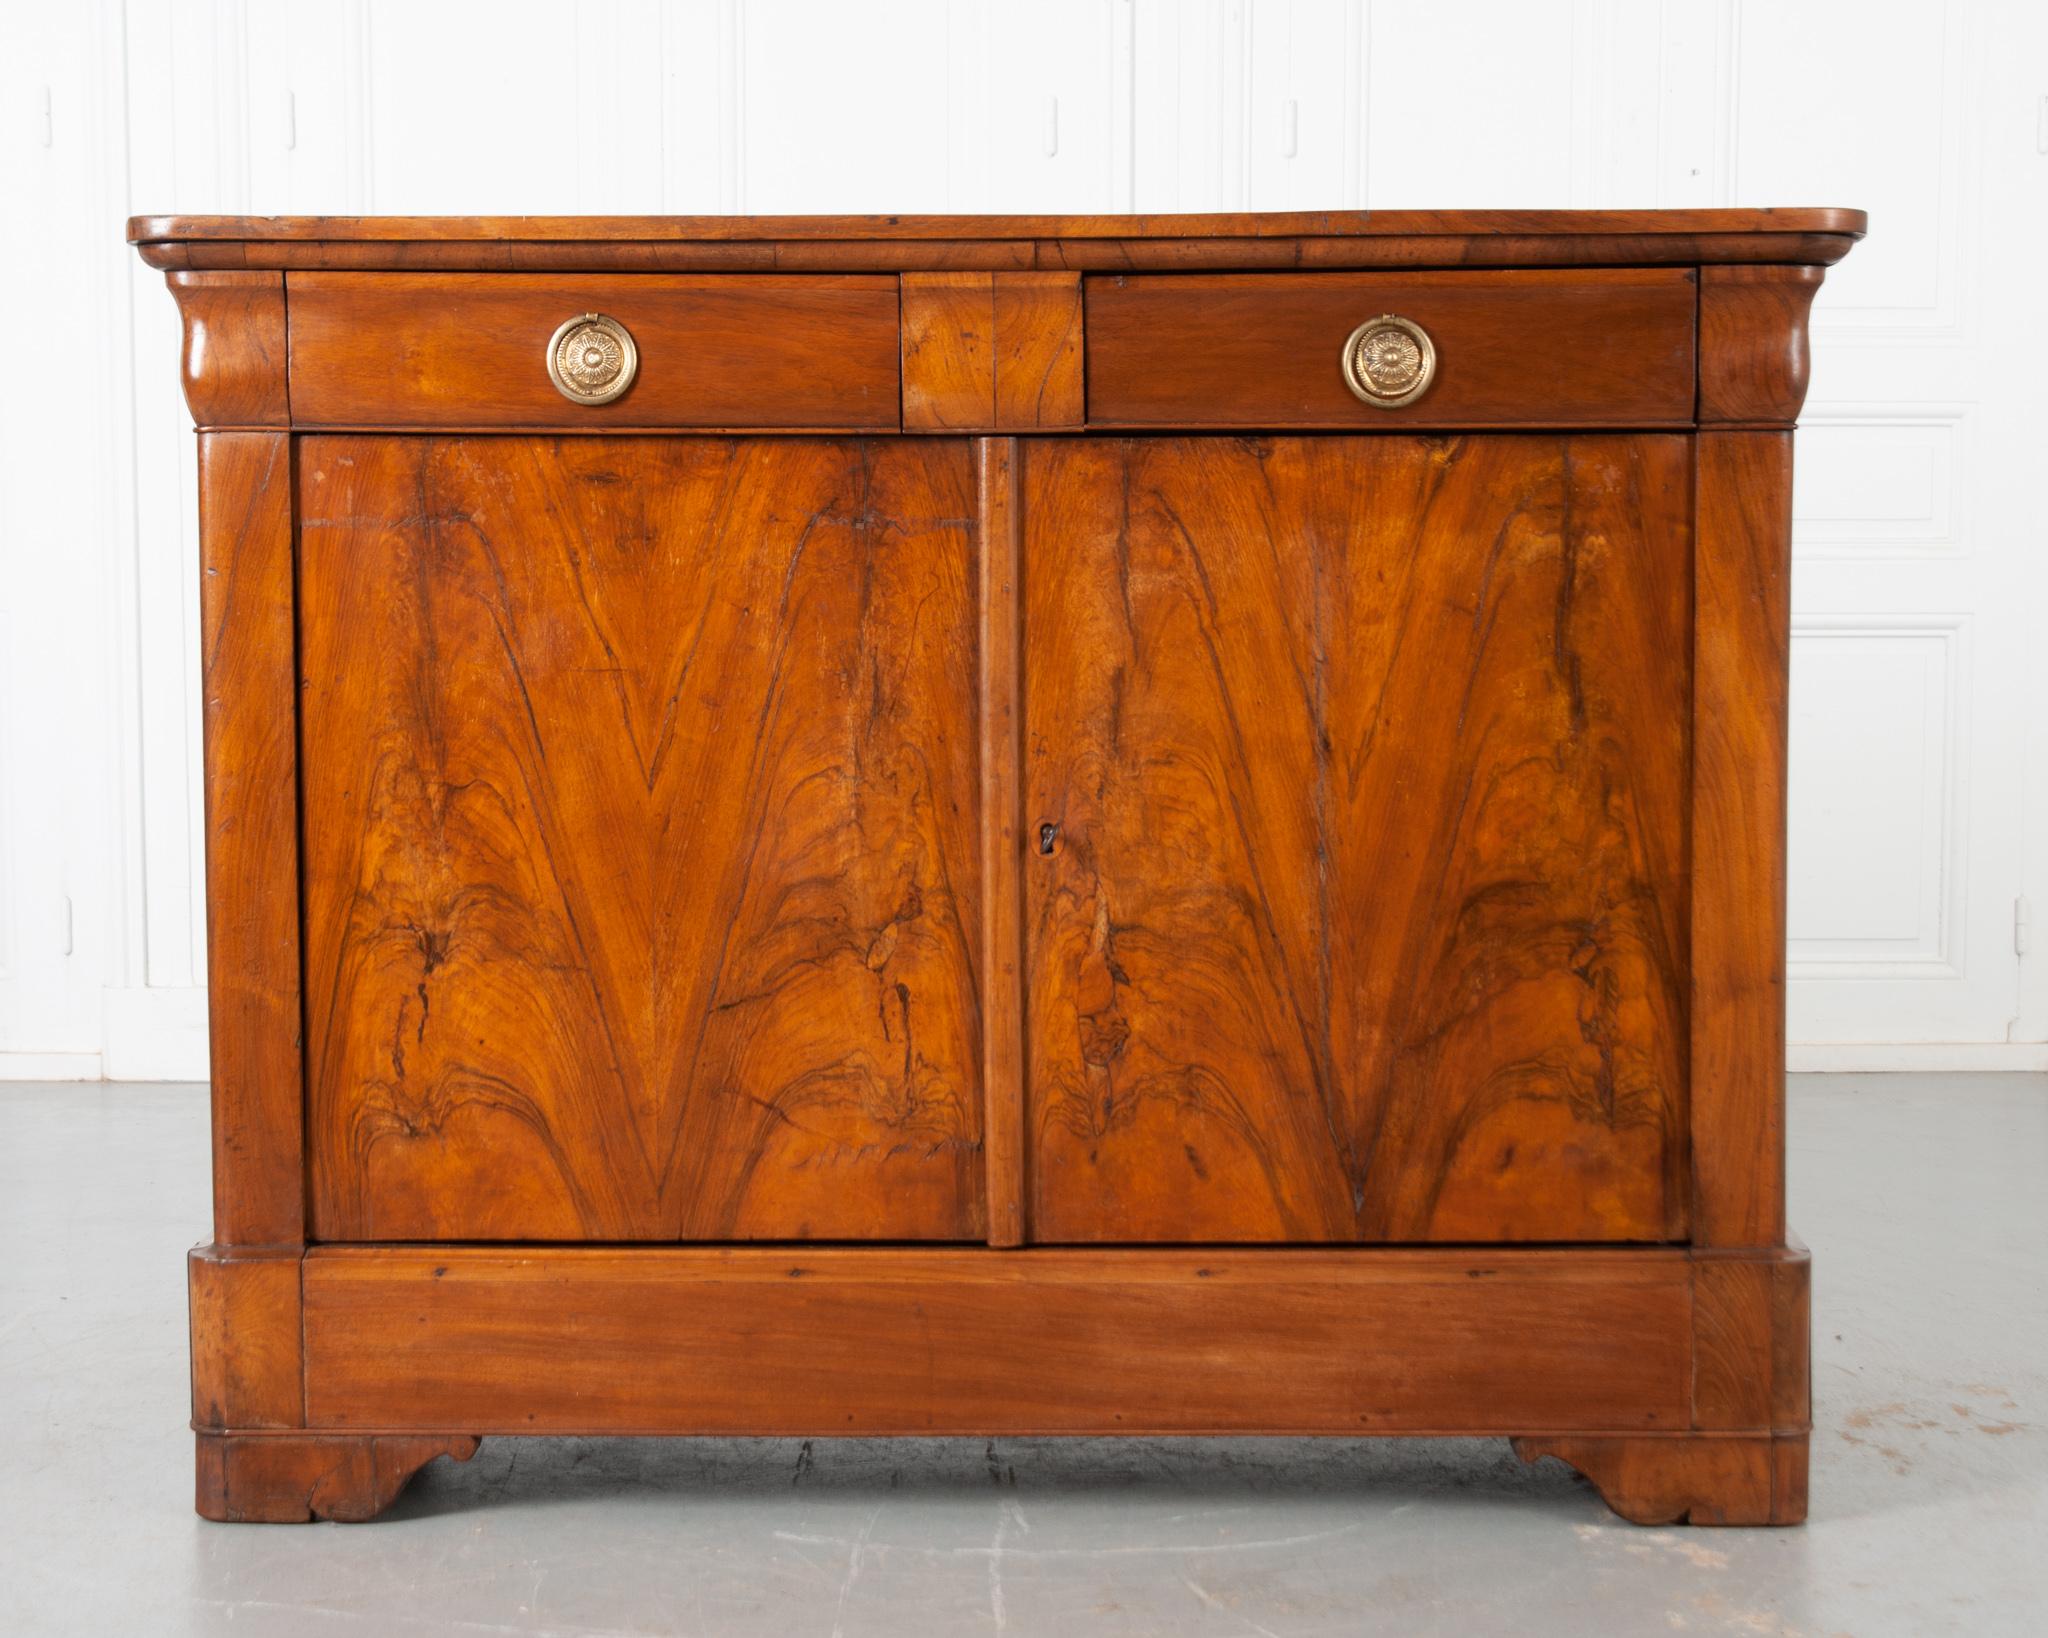 Wonderful, book matched burl walnut veneer draws the eye towards this luring Louis Philippe buffet. Made in France, circa 1880, the case antique is constructed with two drawers set above a singular interior cavity. The walnut top has rounded front